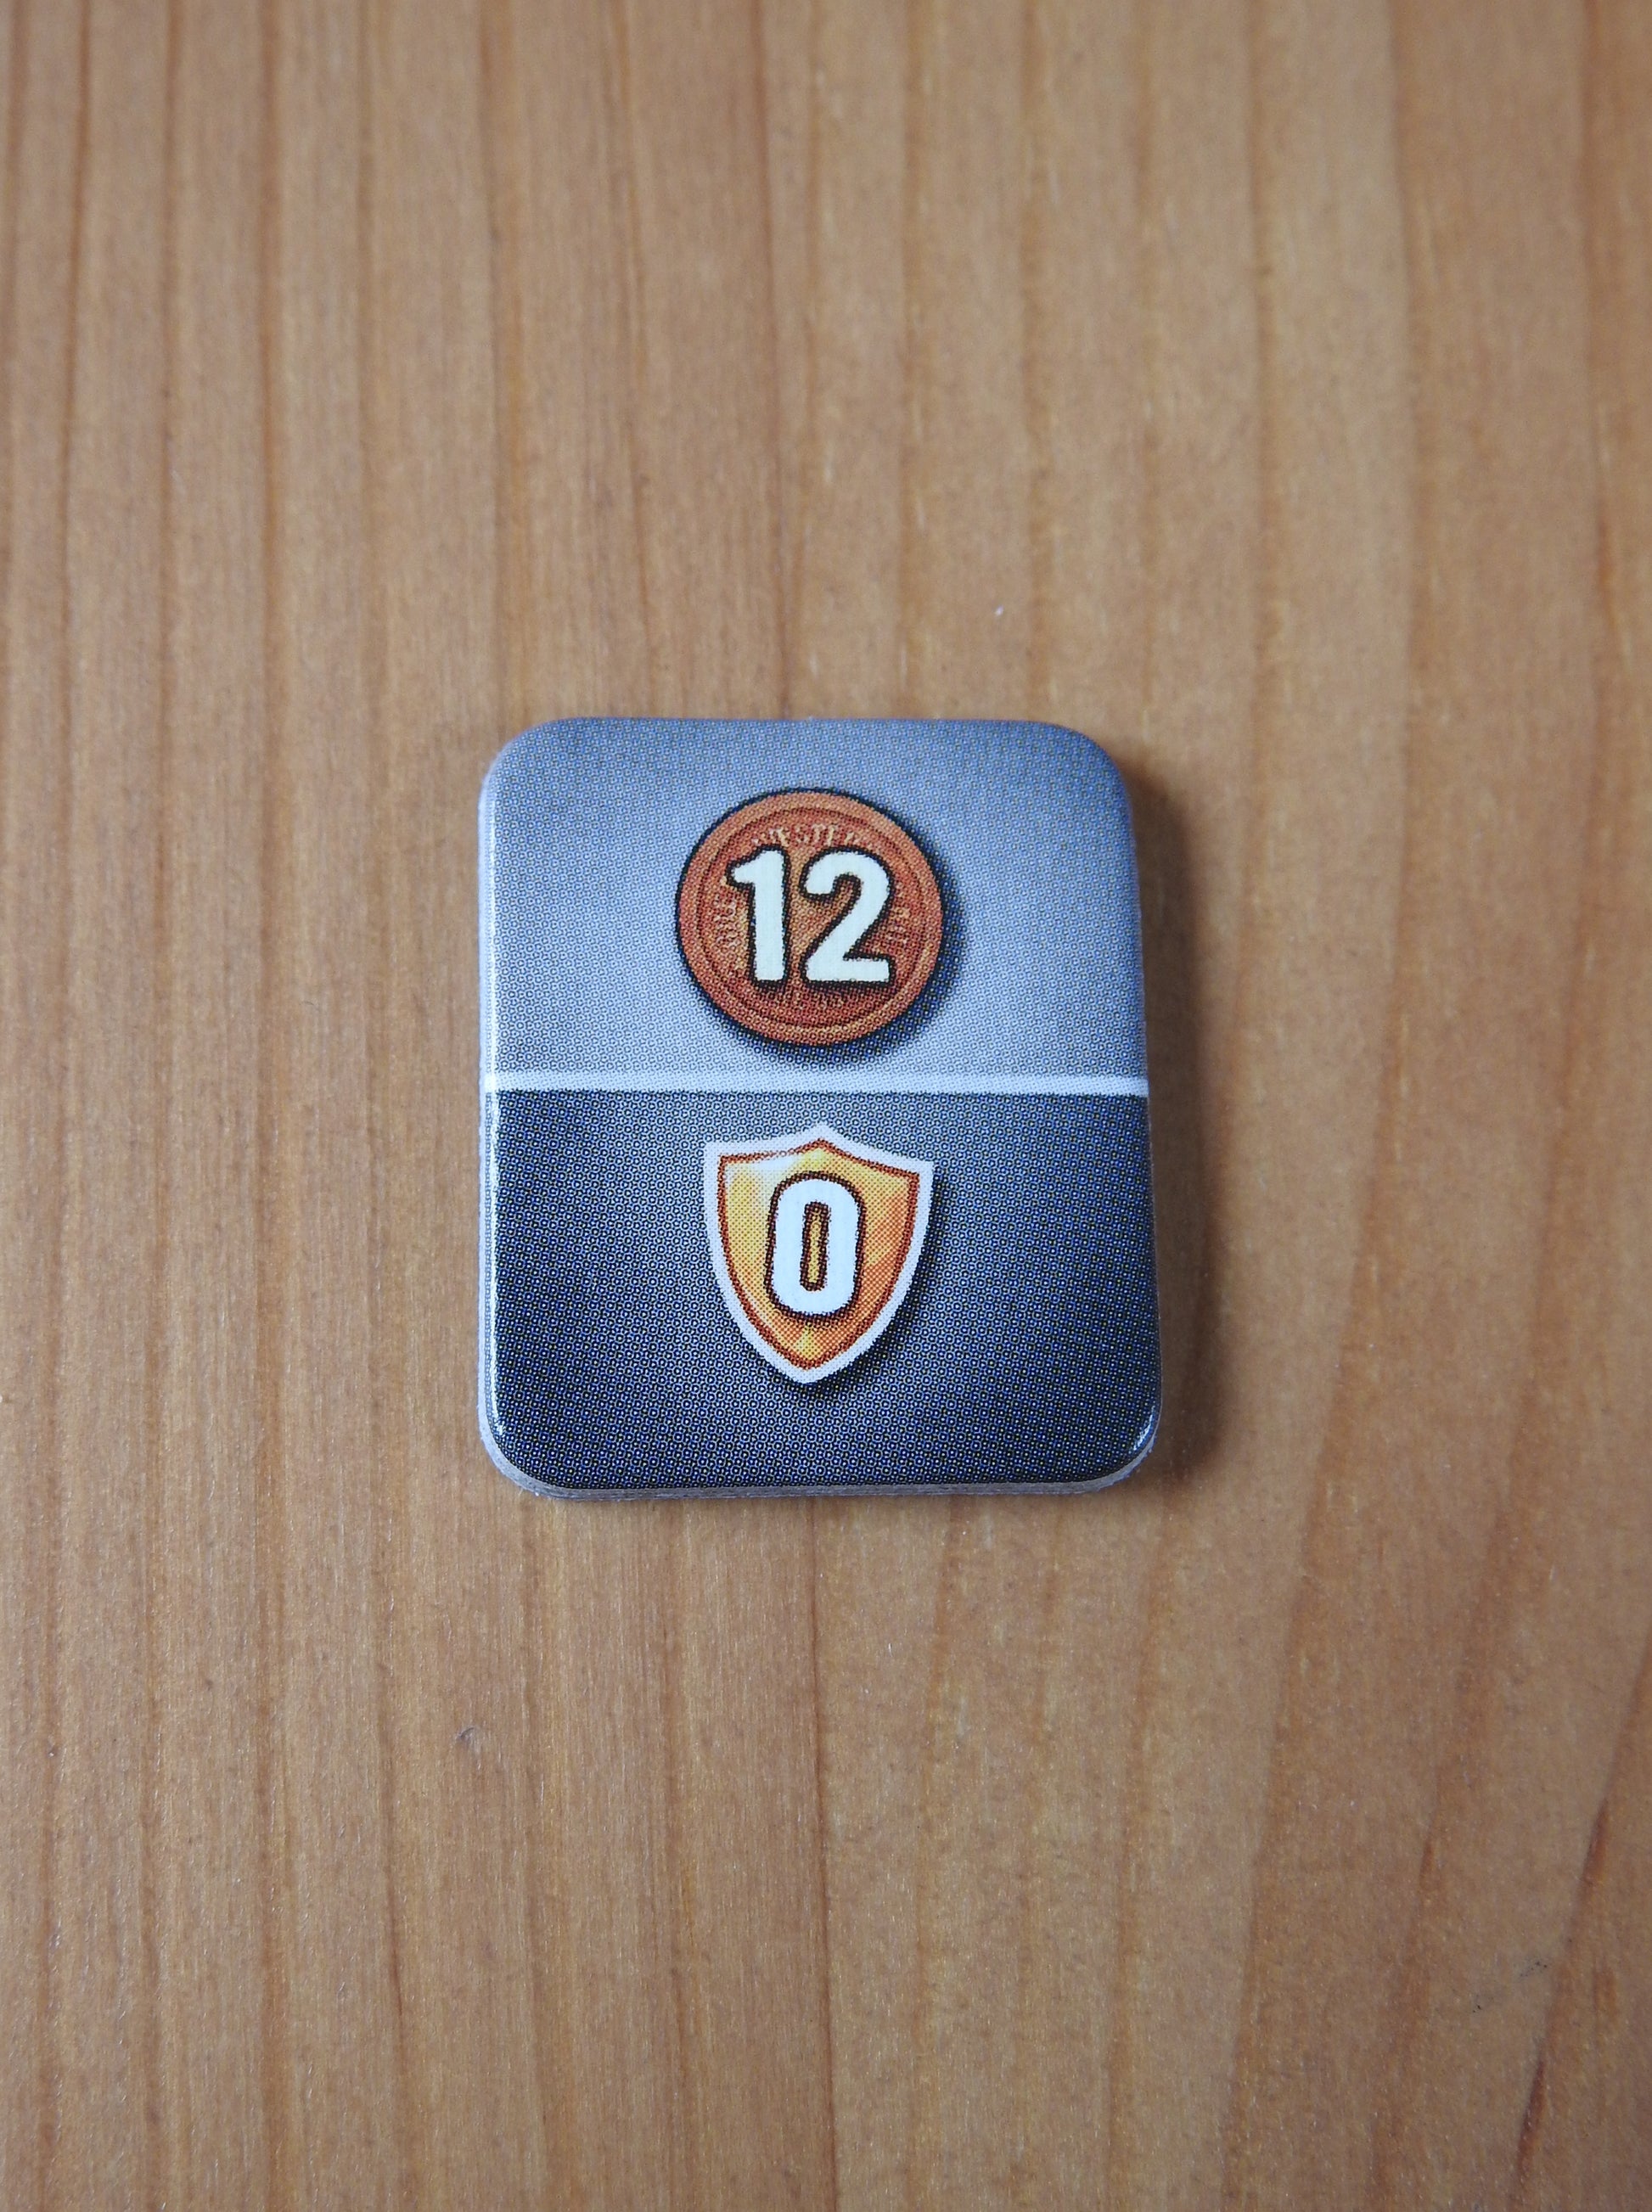 Close-up of the other included tile, which features a different special bonus.